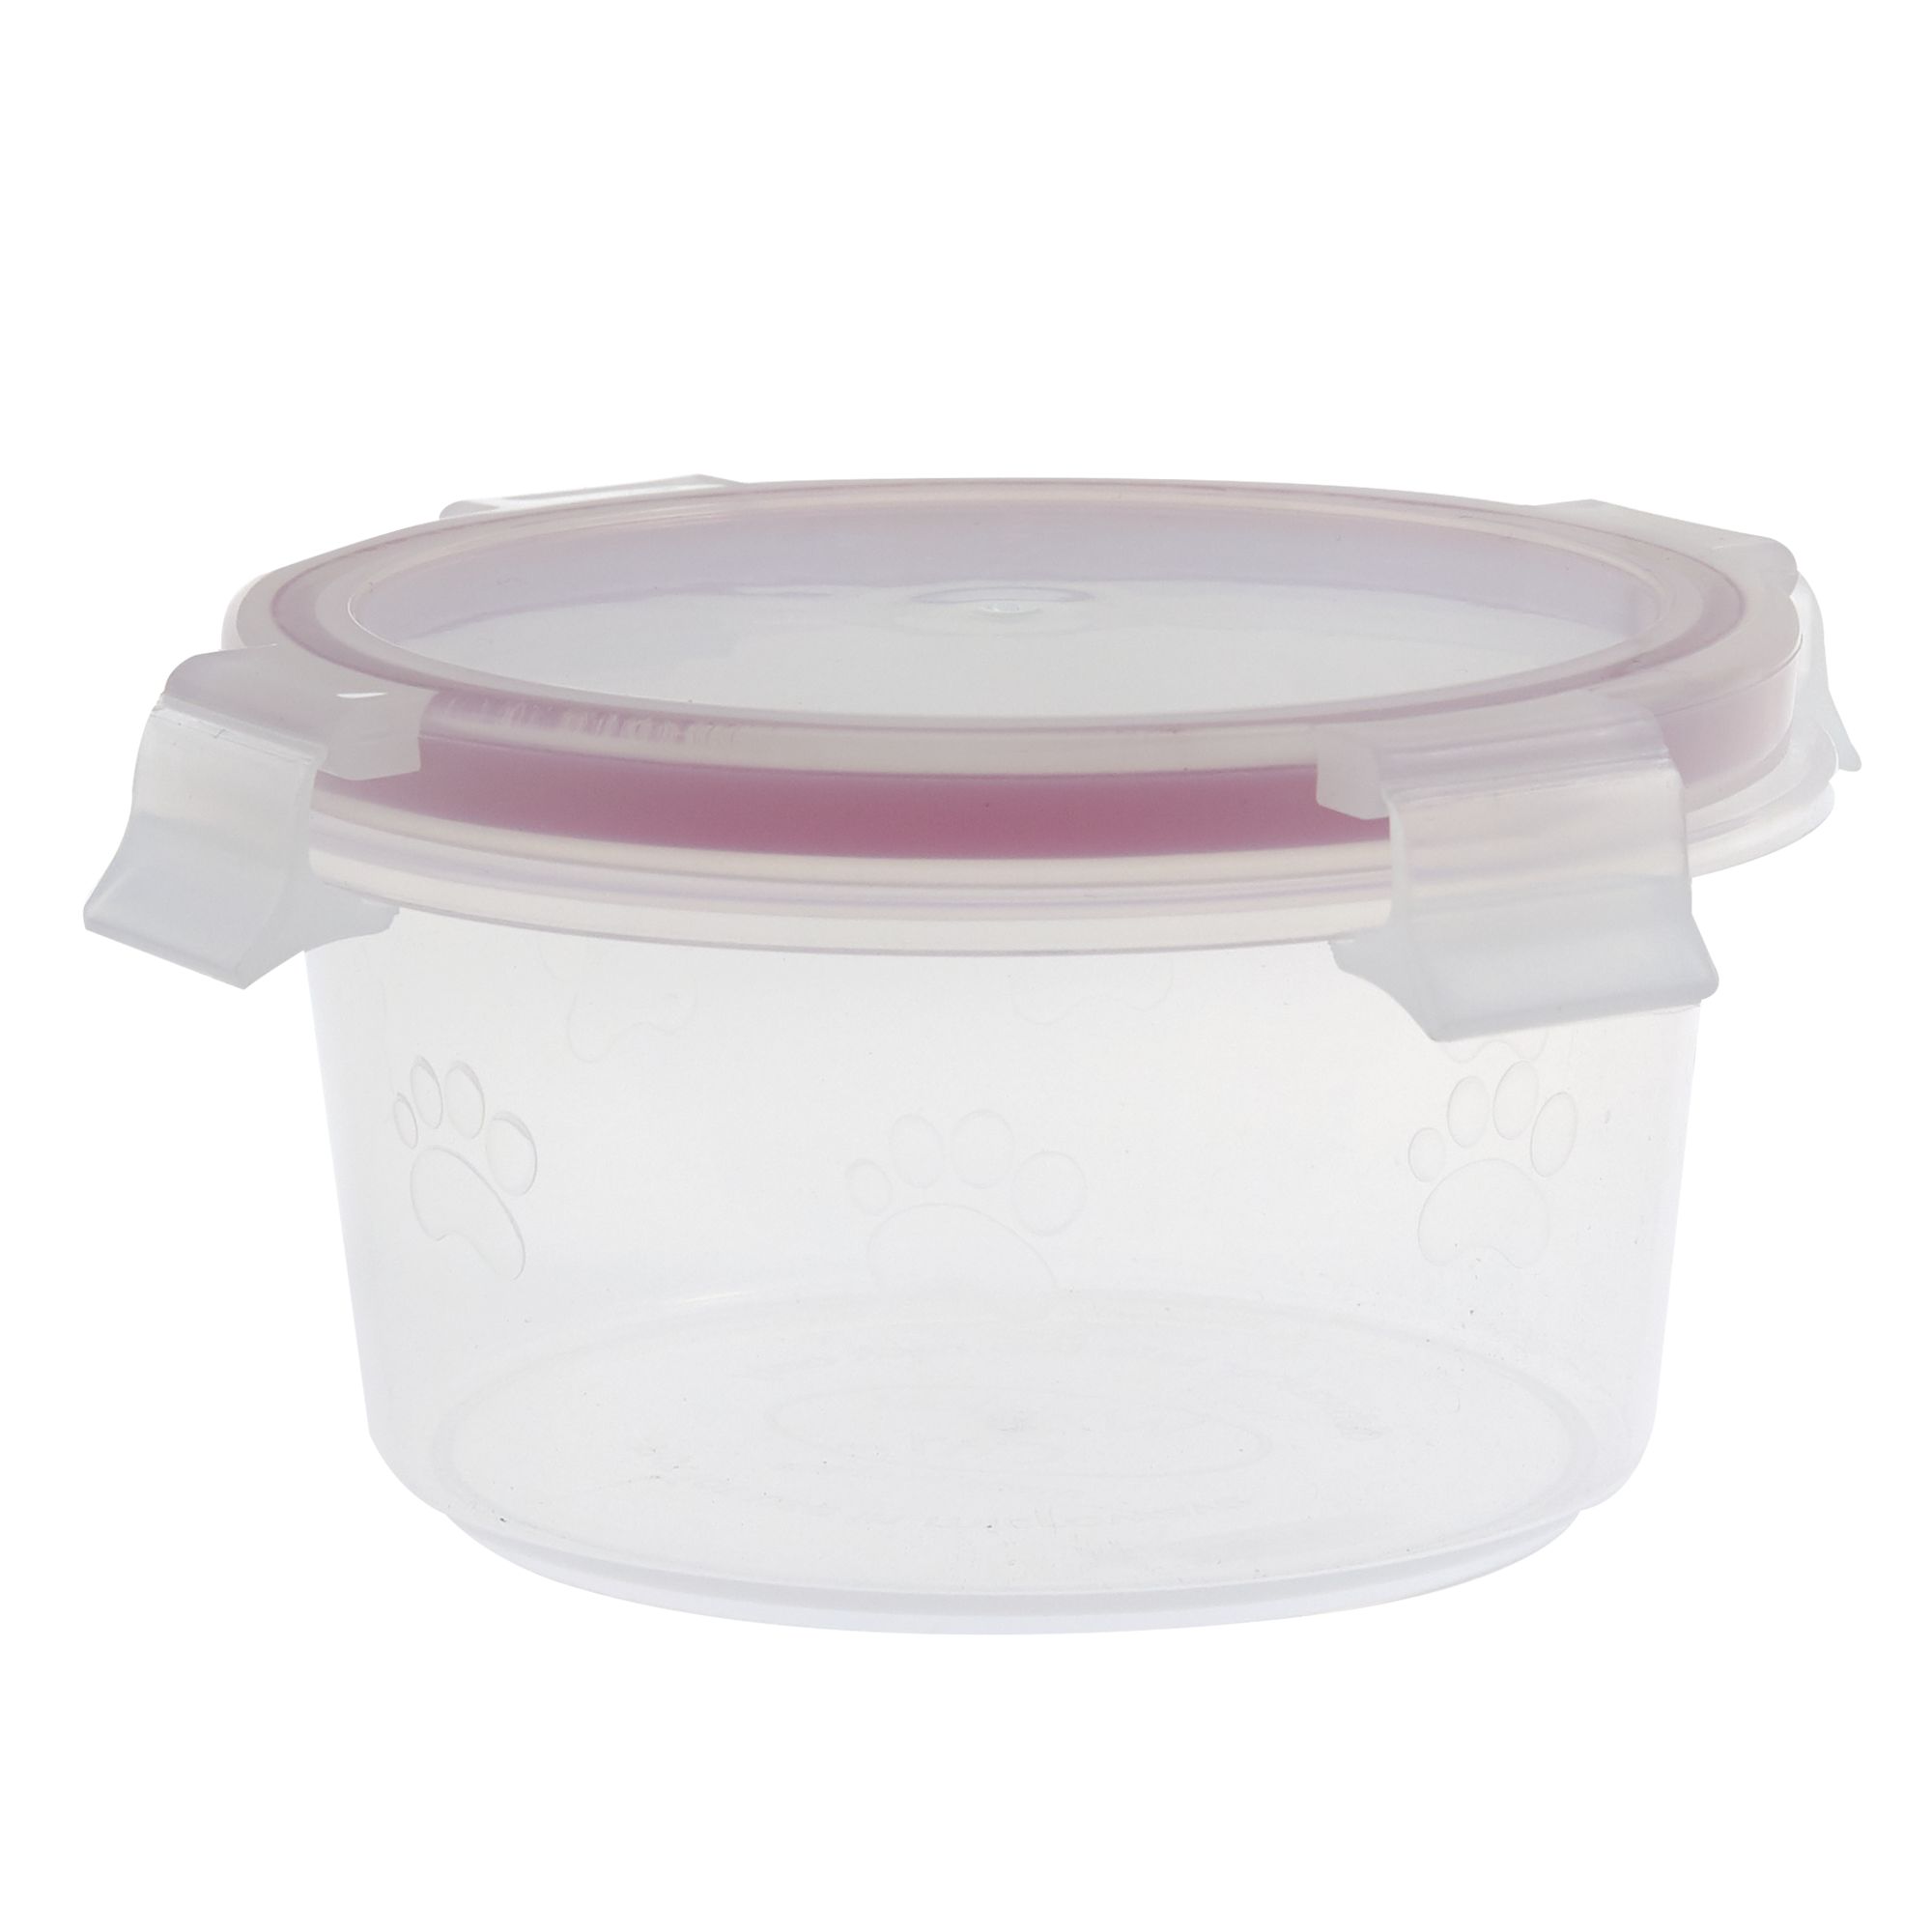 petsmart food container